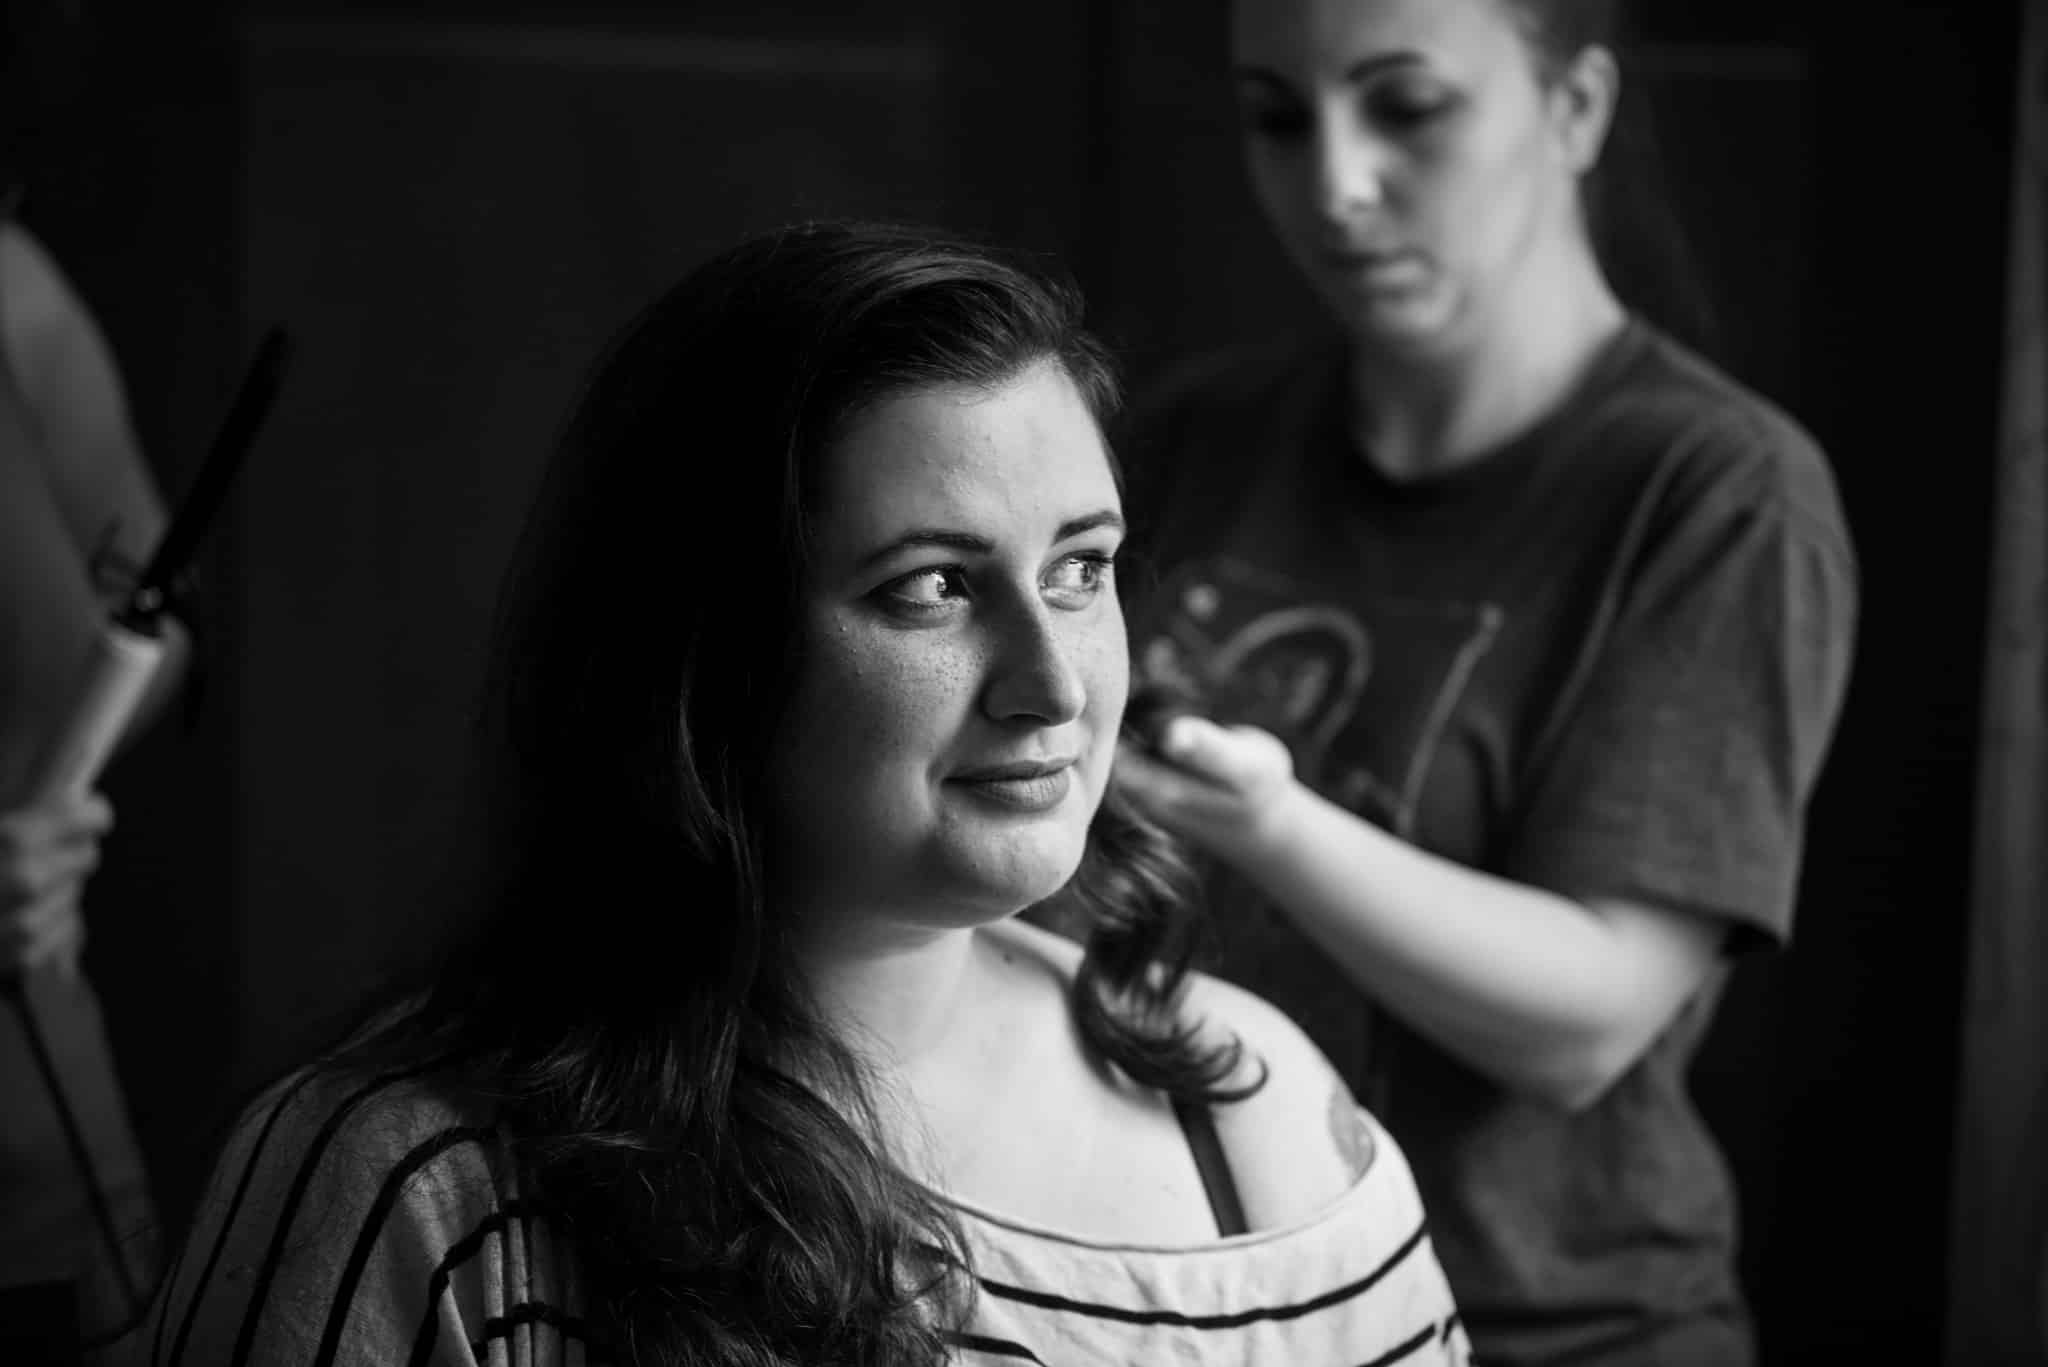 Plus-size portrait photography (and more)